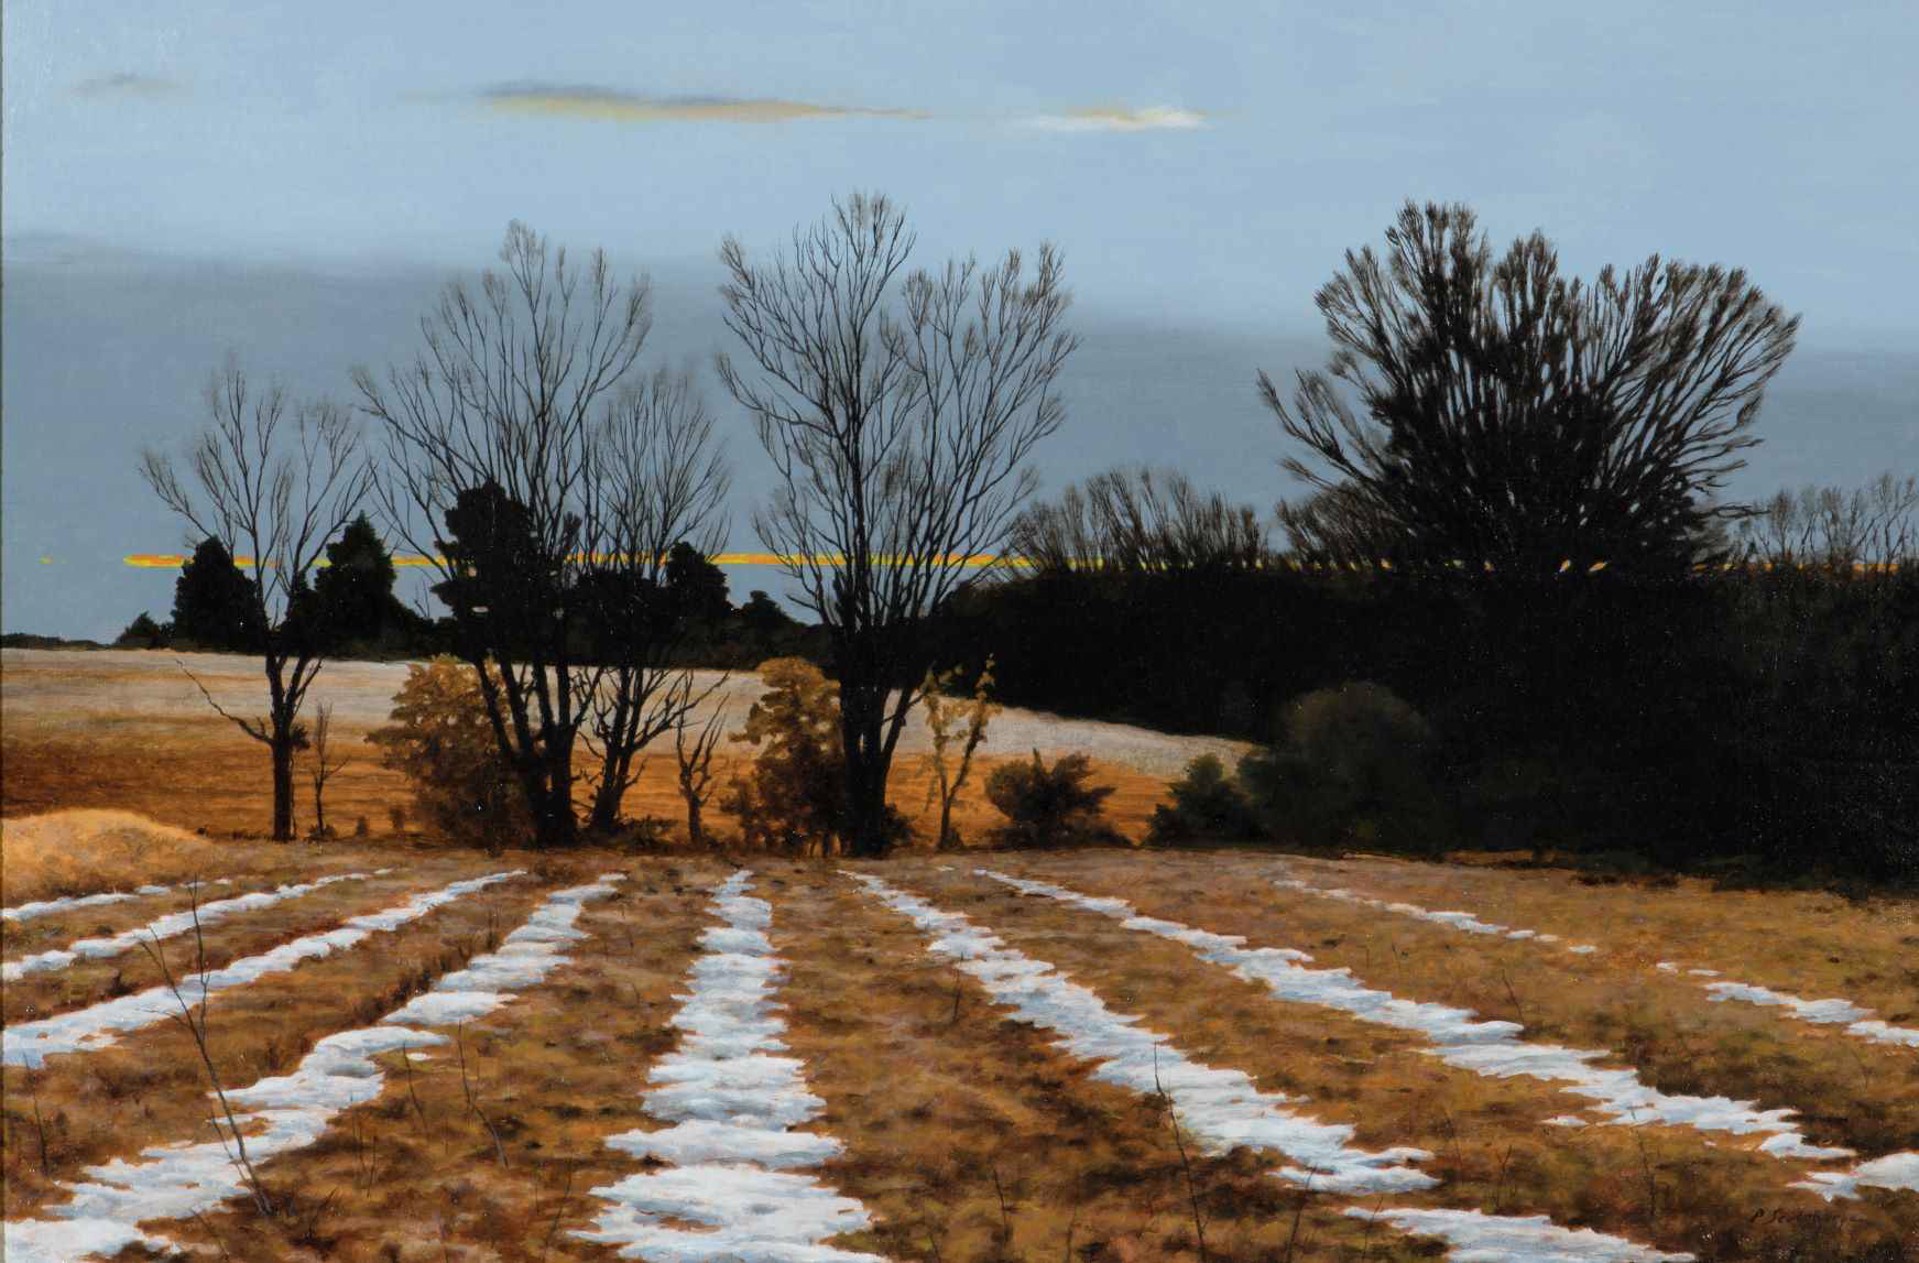 Ice in the Furrows by Peter Sculthorpe